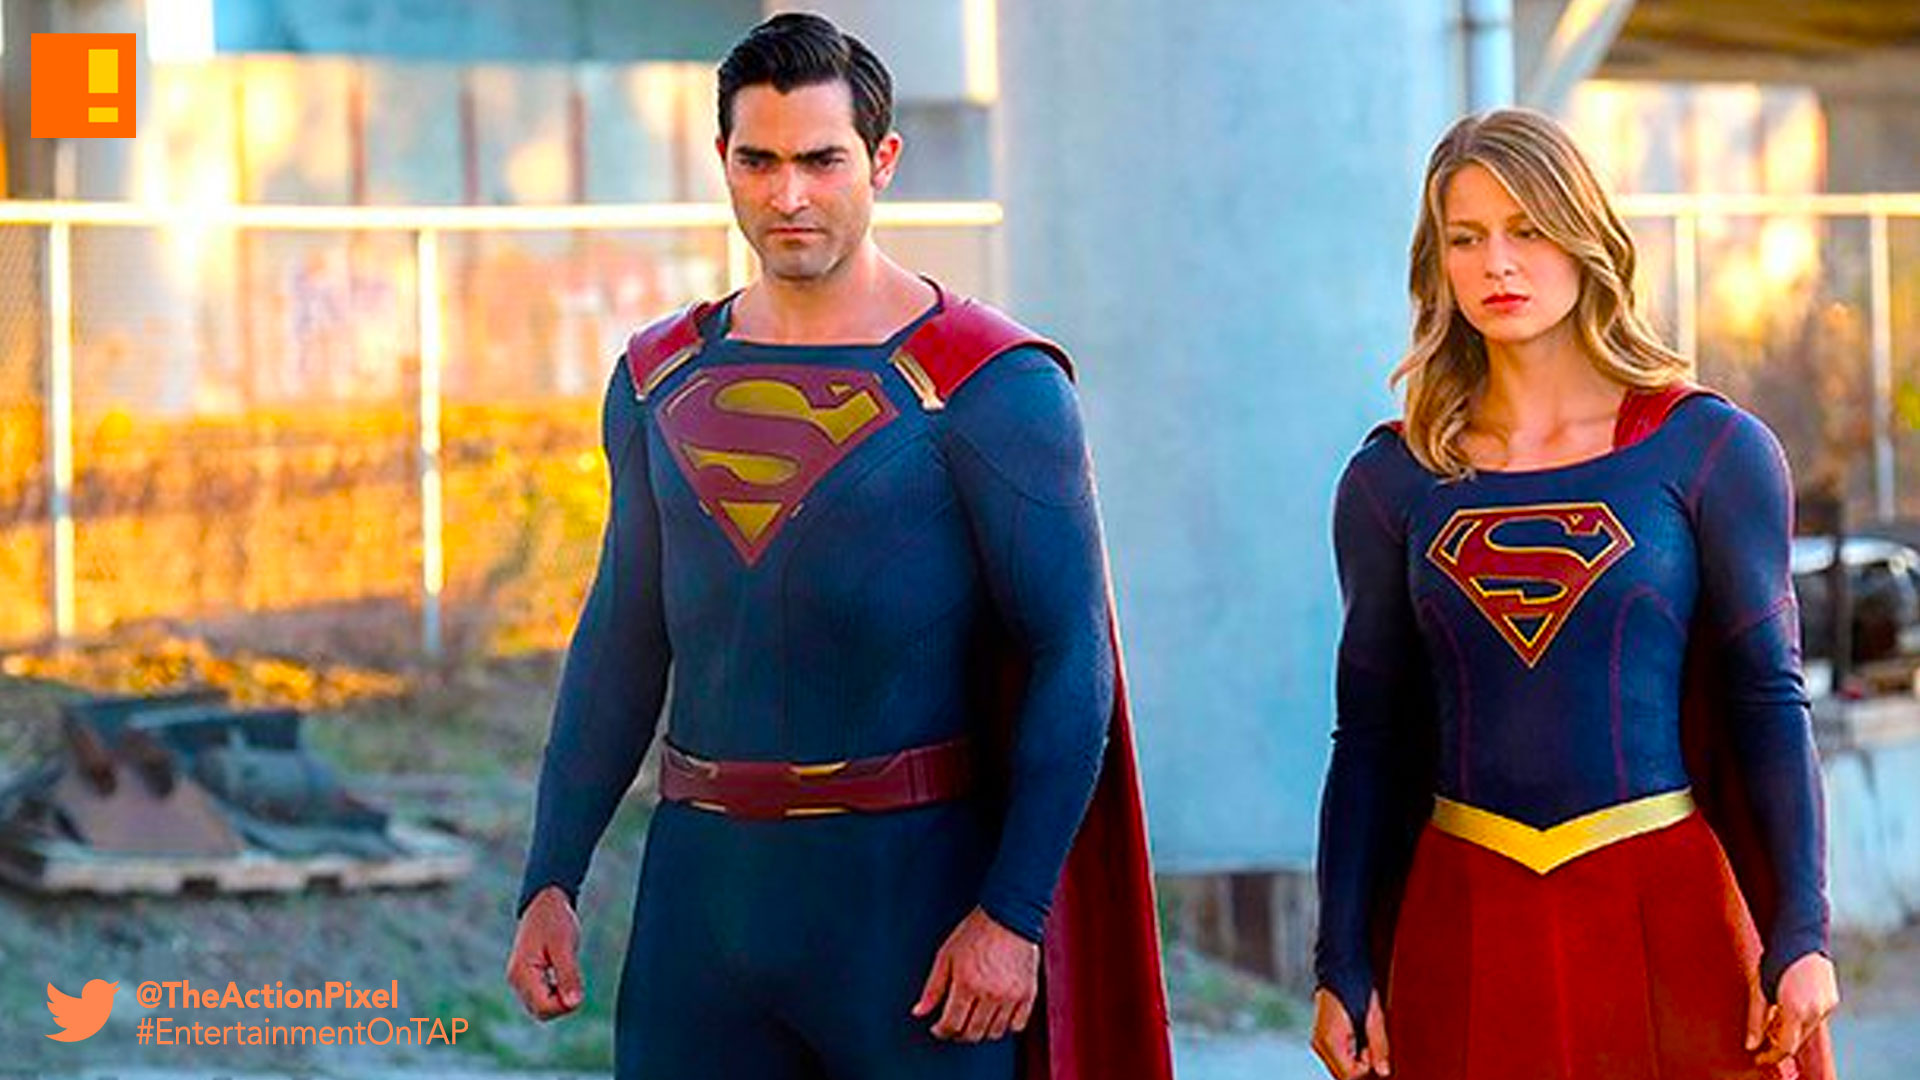 supergirl, superman, the cw network, the cw, season 2, trailer, the action pixel, entertainment on tap